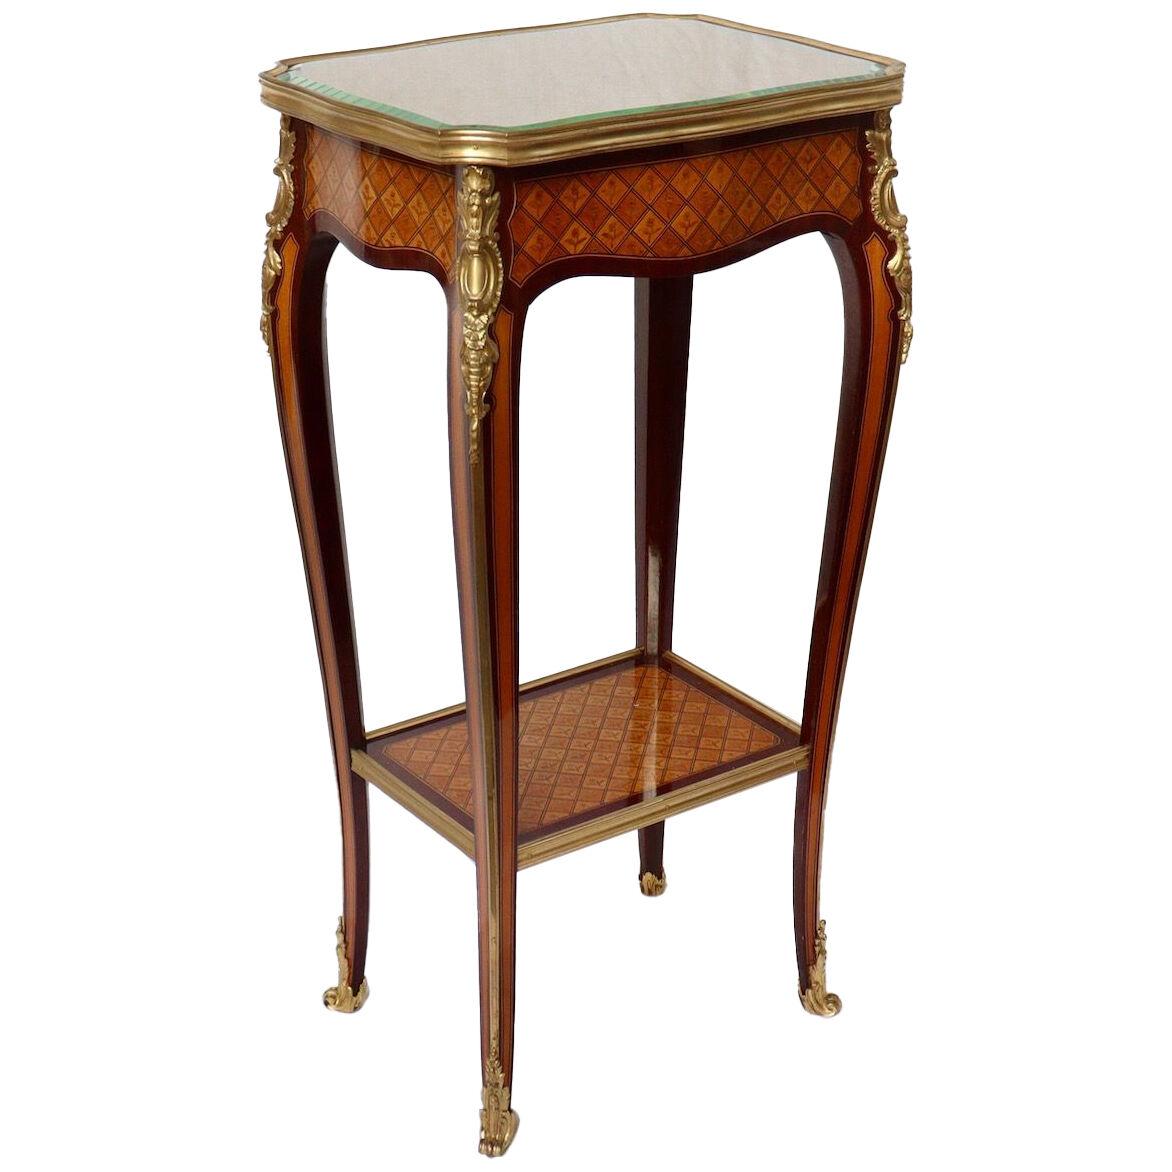 A French Ormolu-Mounted Marquetry Table Ambulante by Henry Dasson circa 1885